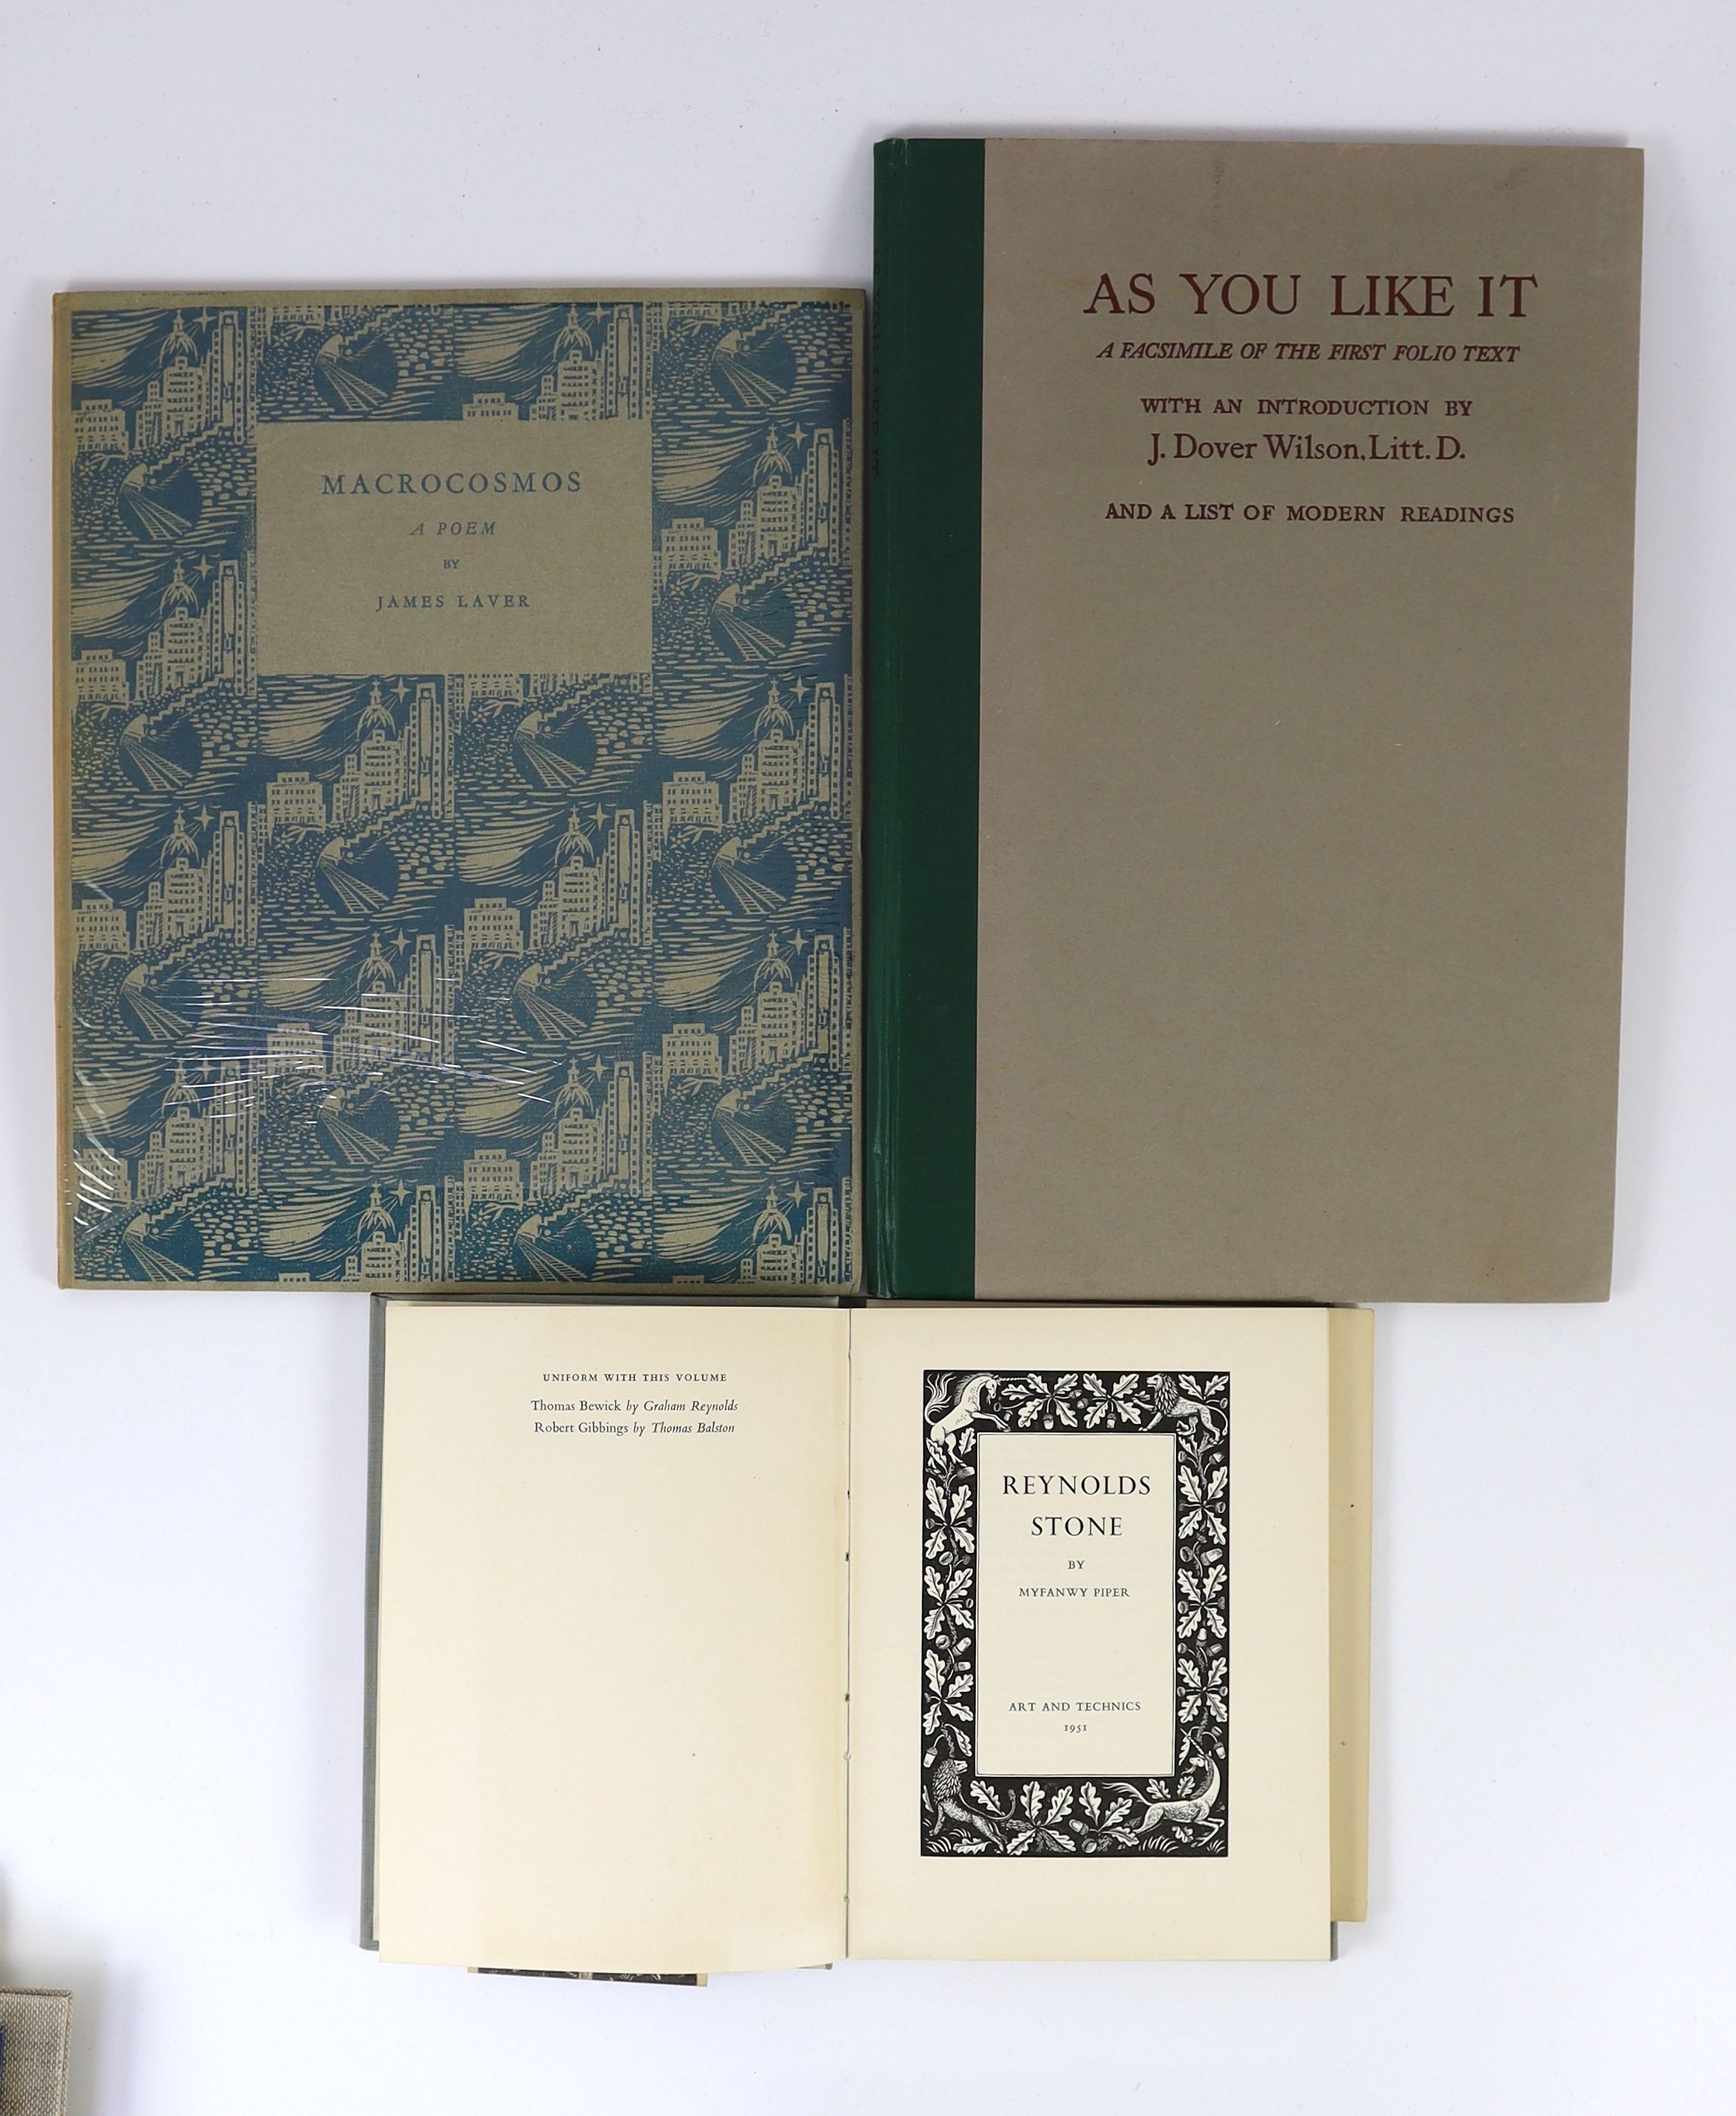 Private press and limited editions - 6 works - Laver, James - Macrocomos: A Poem, one of 775, 4to, printed paper boards, William Heinemann, London, 1929, in slip case; Shakespeare, William - As You Like It, a facsimile o